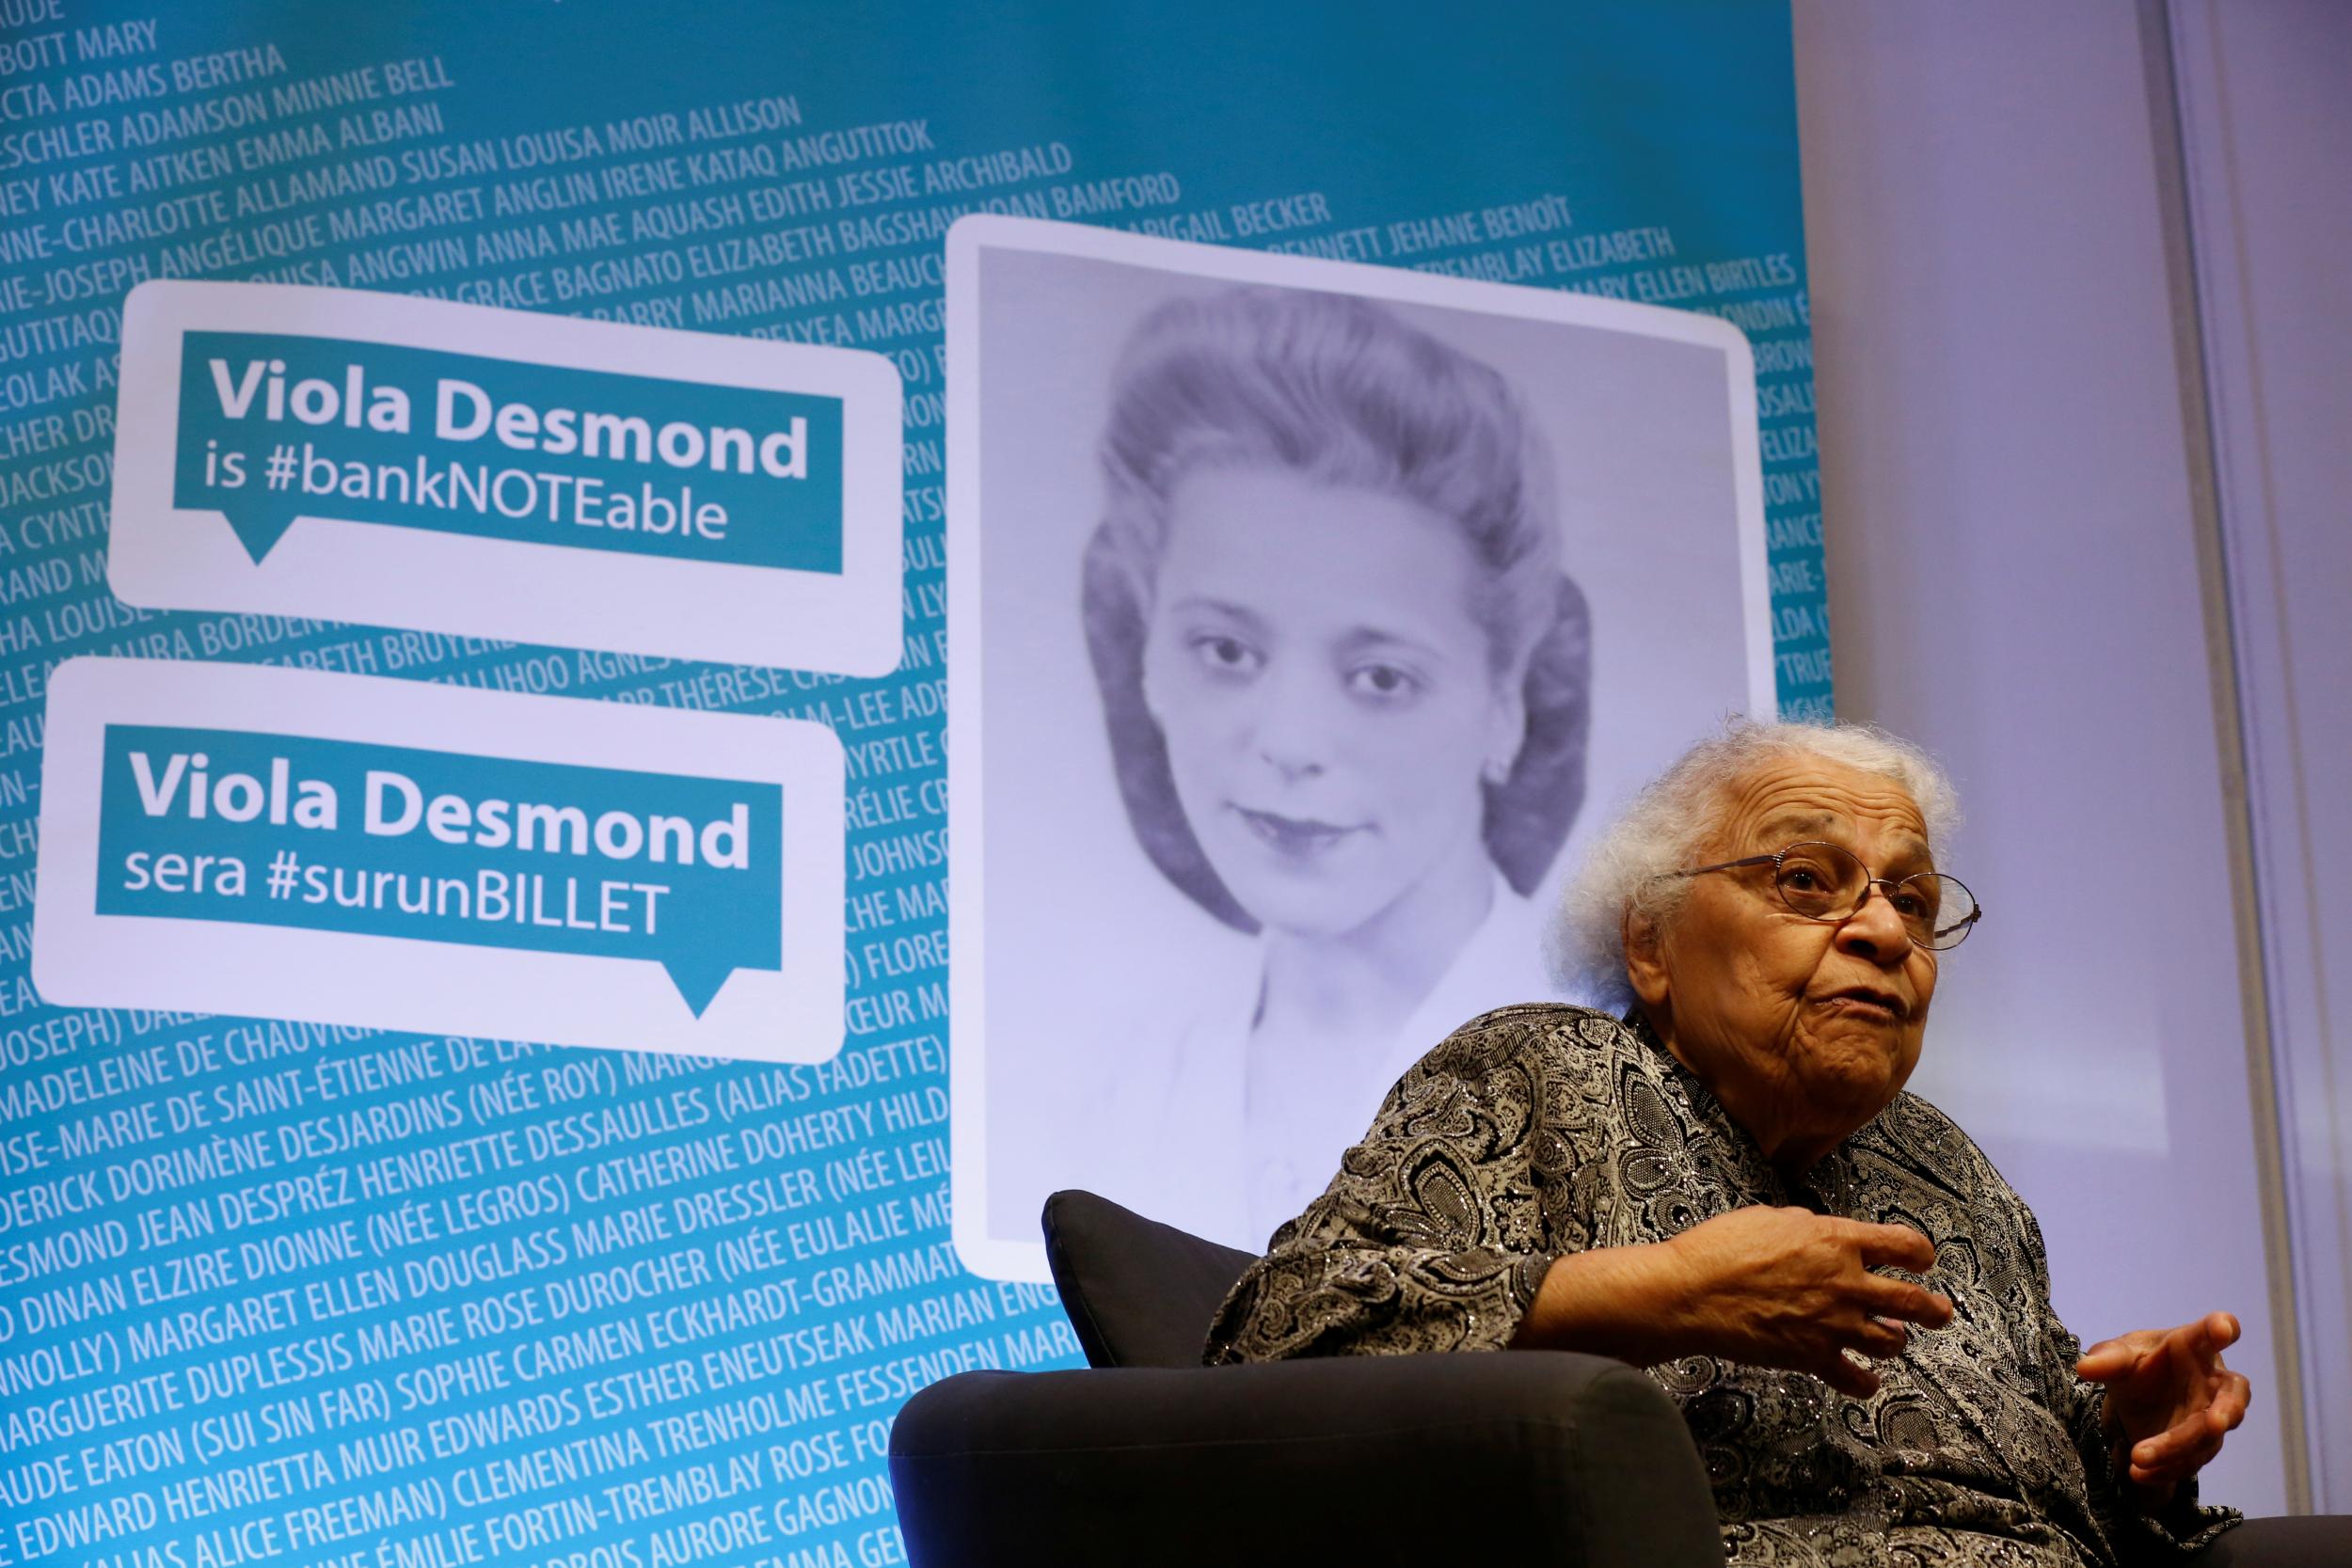 Viola Desmond refused to leave a white-only section of a theatre in 1946